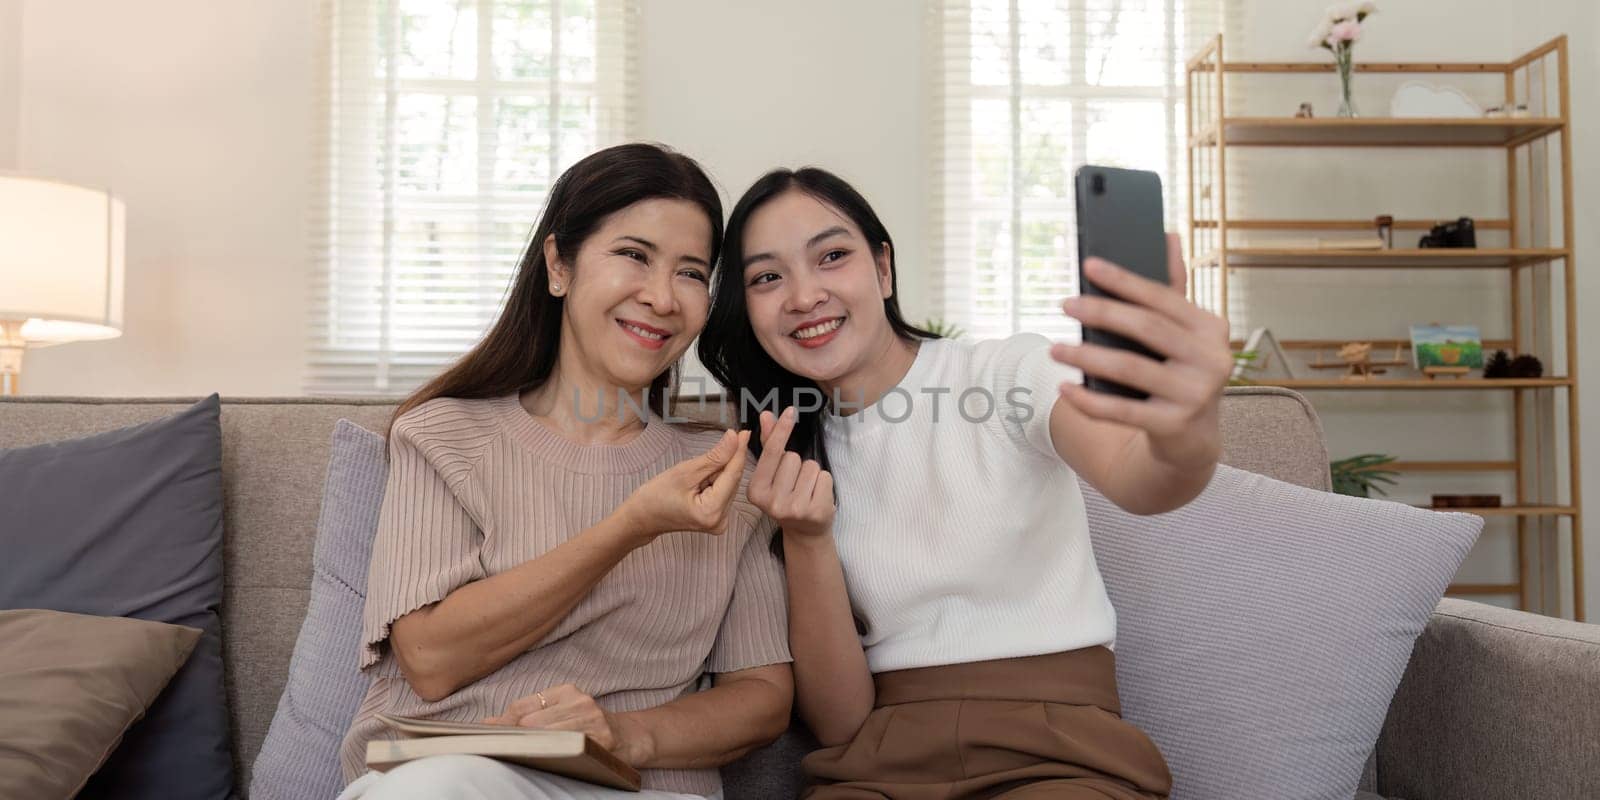 Daughter adult taking selfie using mobile phone with senior mother at home. Happy mother's day by nateemee